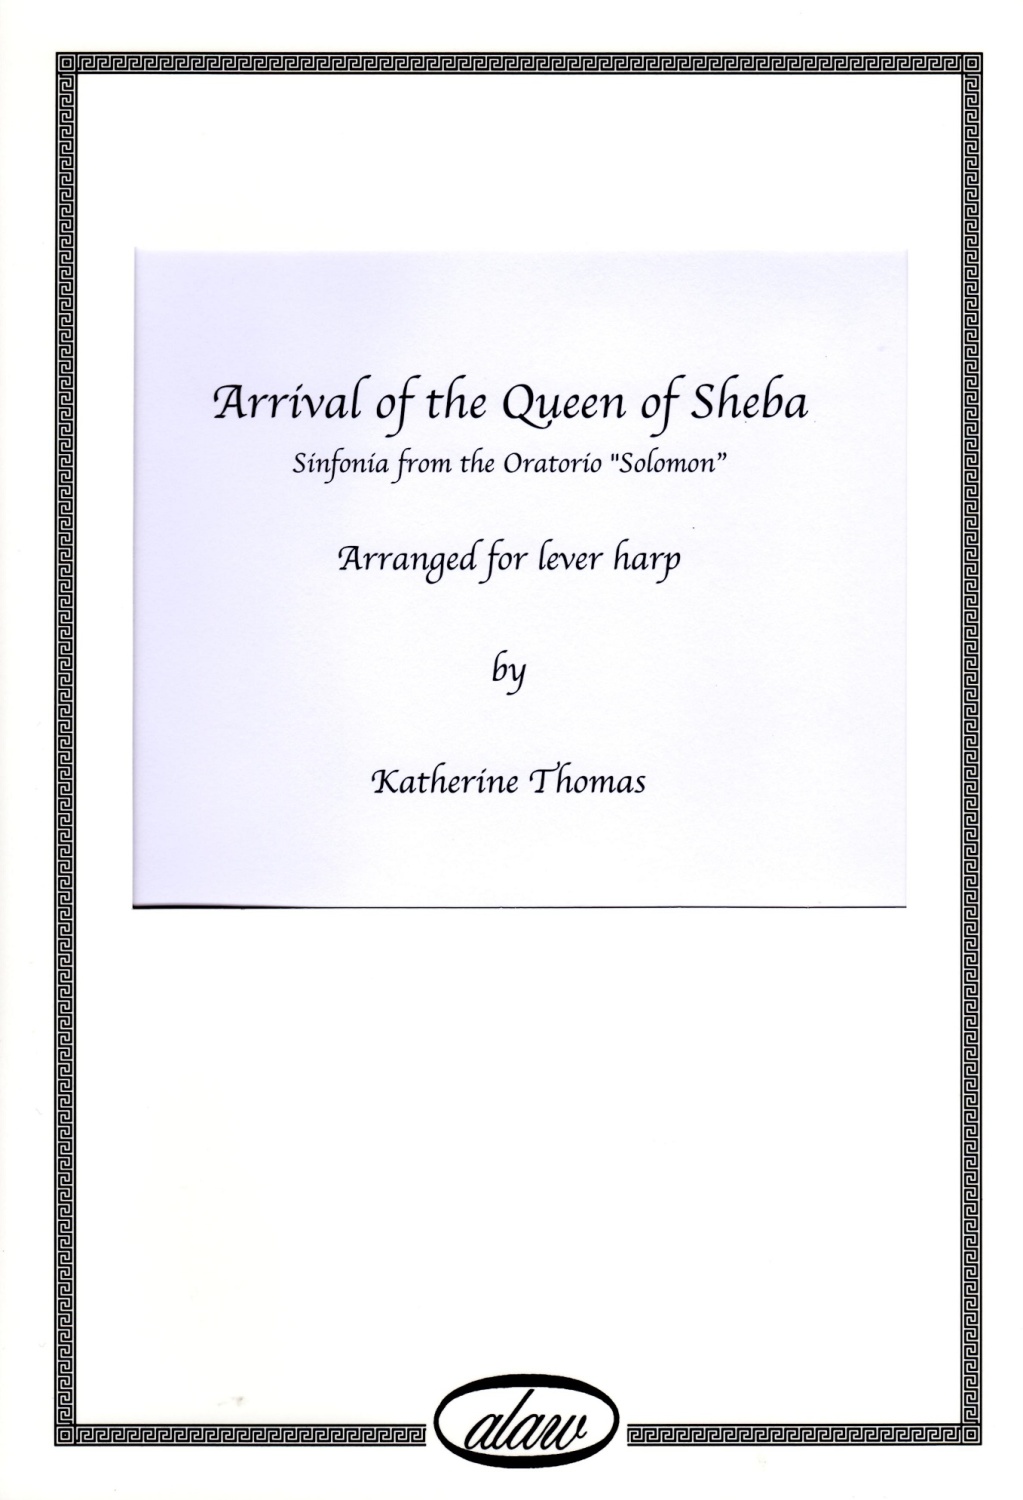 Arrival of the Queen of Sheba - G.F. Handel arr. Katherine Thomas